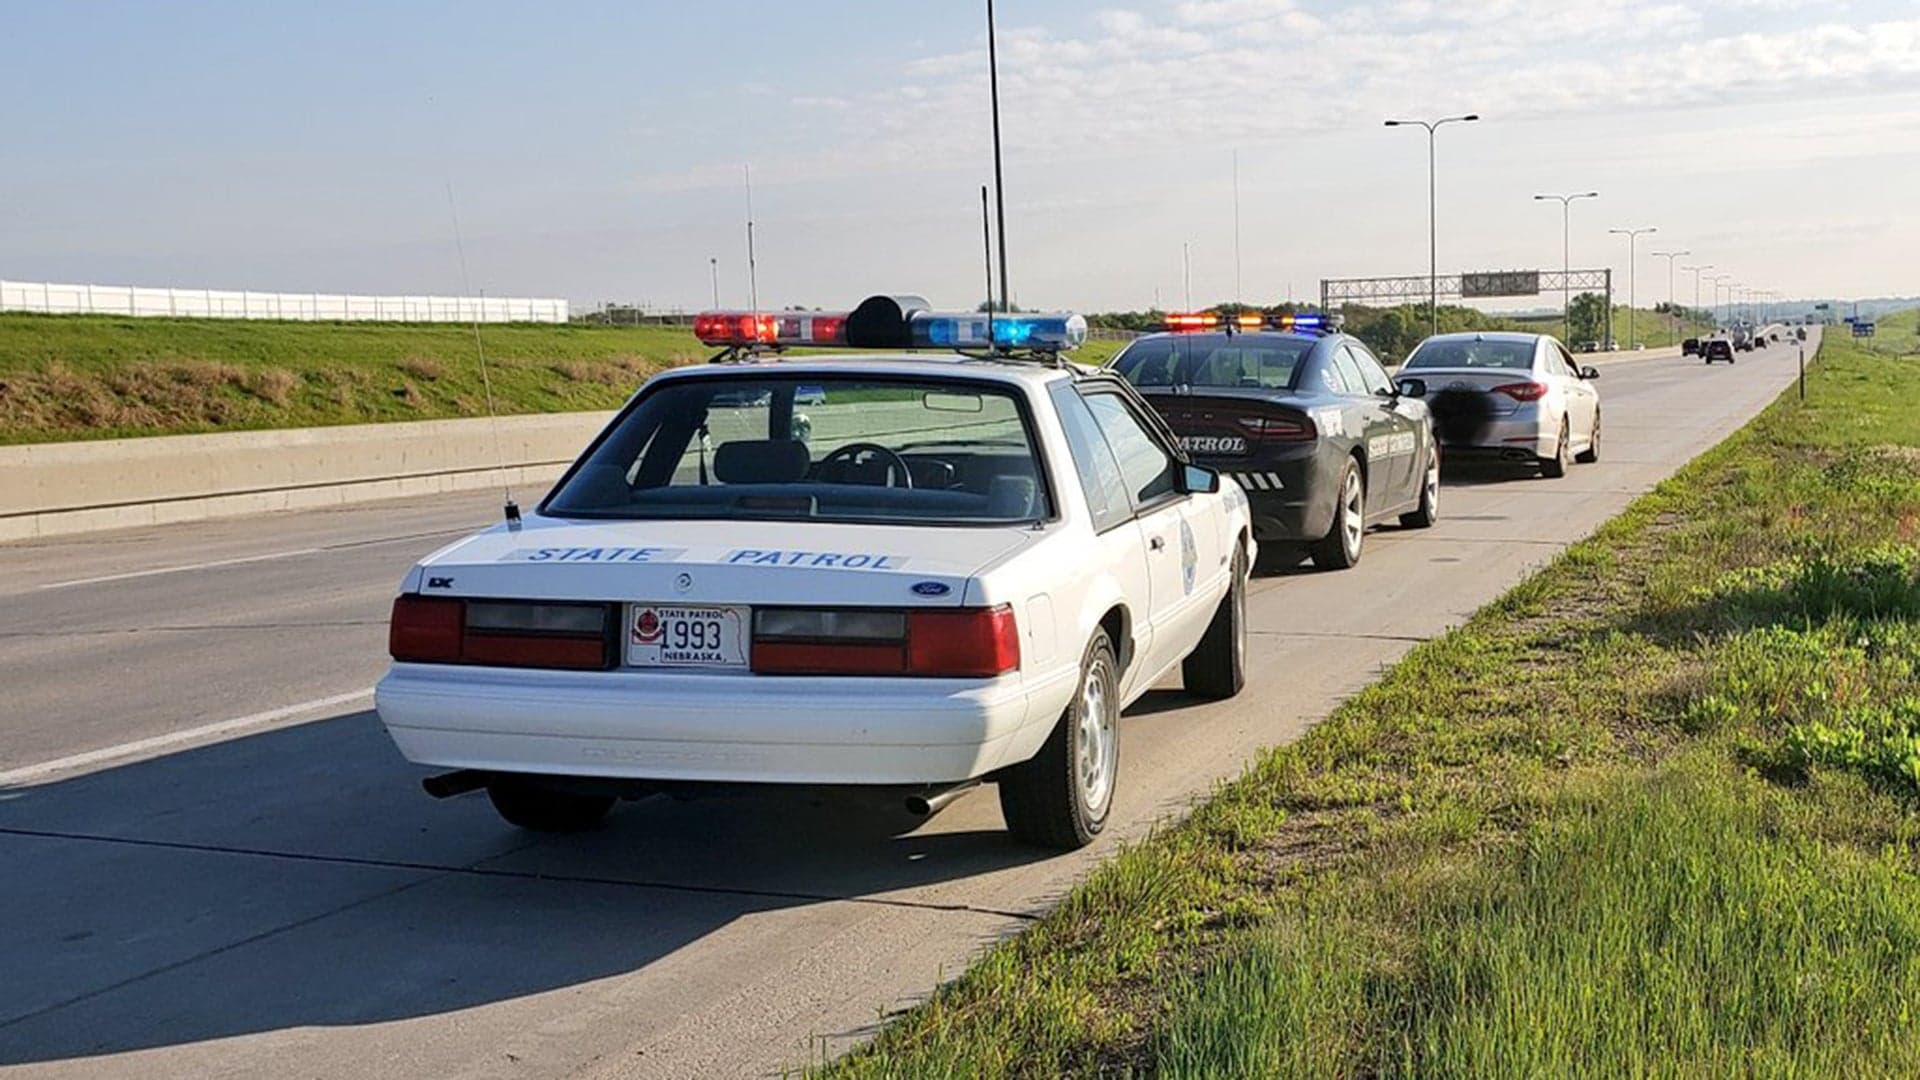 Nebraska State Patrol’s 1993 Ford Mustang SSP Is Still Out There Nailing Speeders